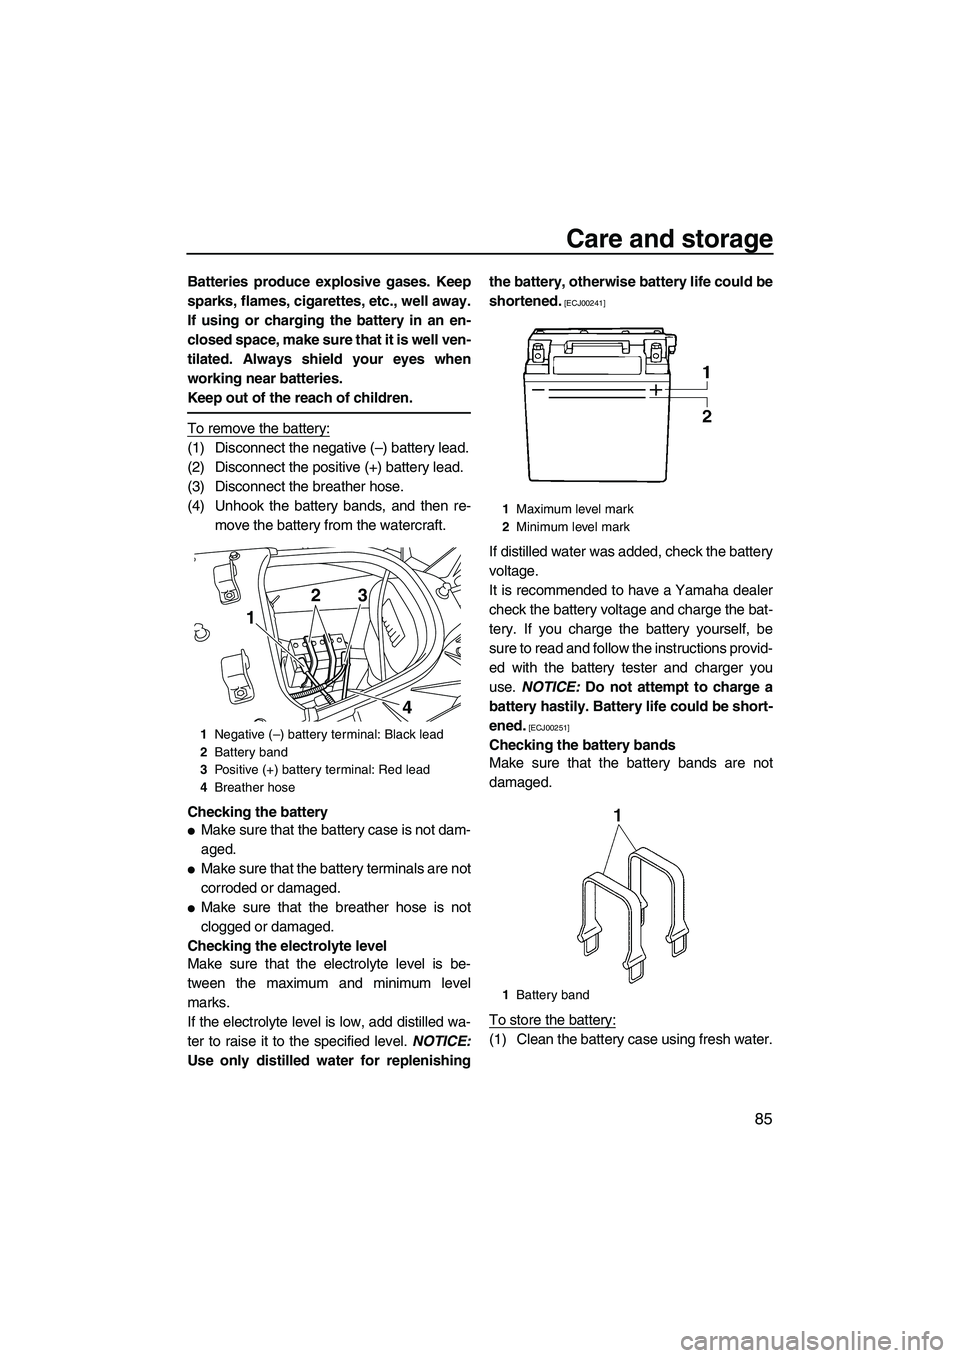 YAMAHA SVHO 2011  Owners Manual Care and storage
85
Batteries produce explosive gases. Keep
sparks, flames, cigarettes, etc., well away.
If using or charging the battery in an en-
closed space, make sure that it is well ven-
tilated